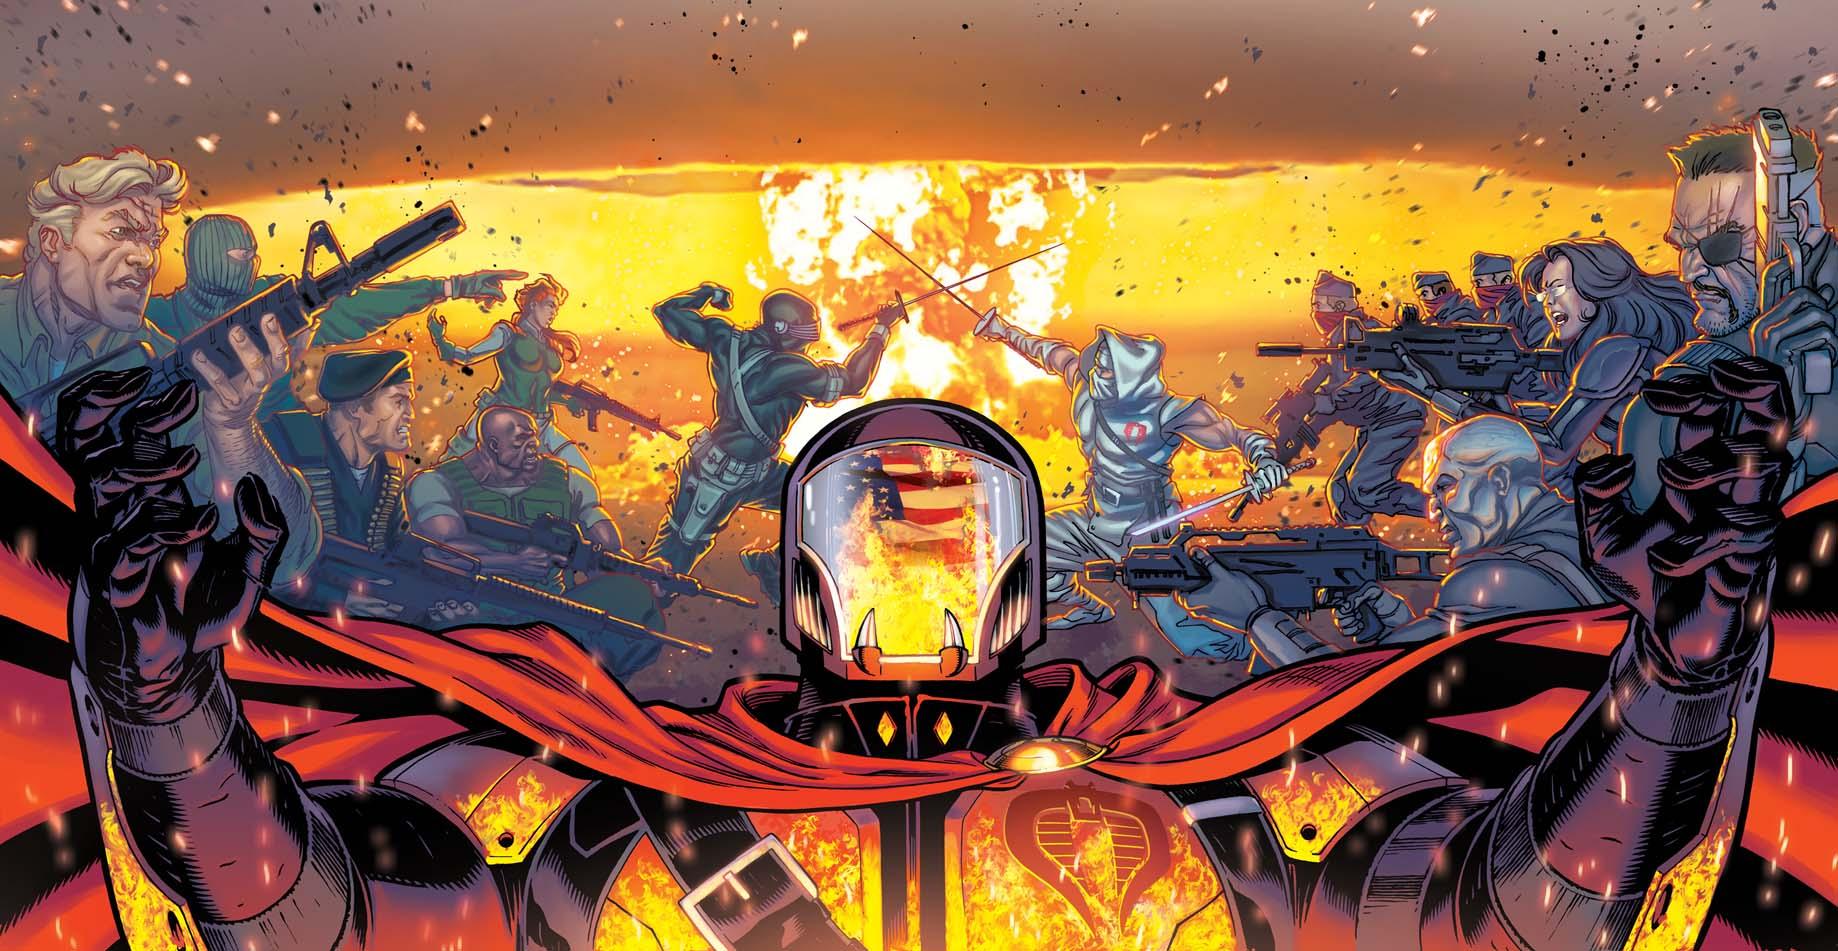 Amazing cover artwork for IDW's Cobra Command. Generals